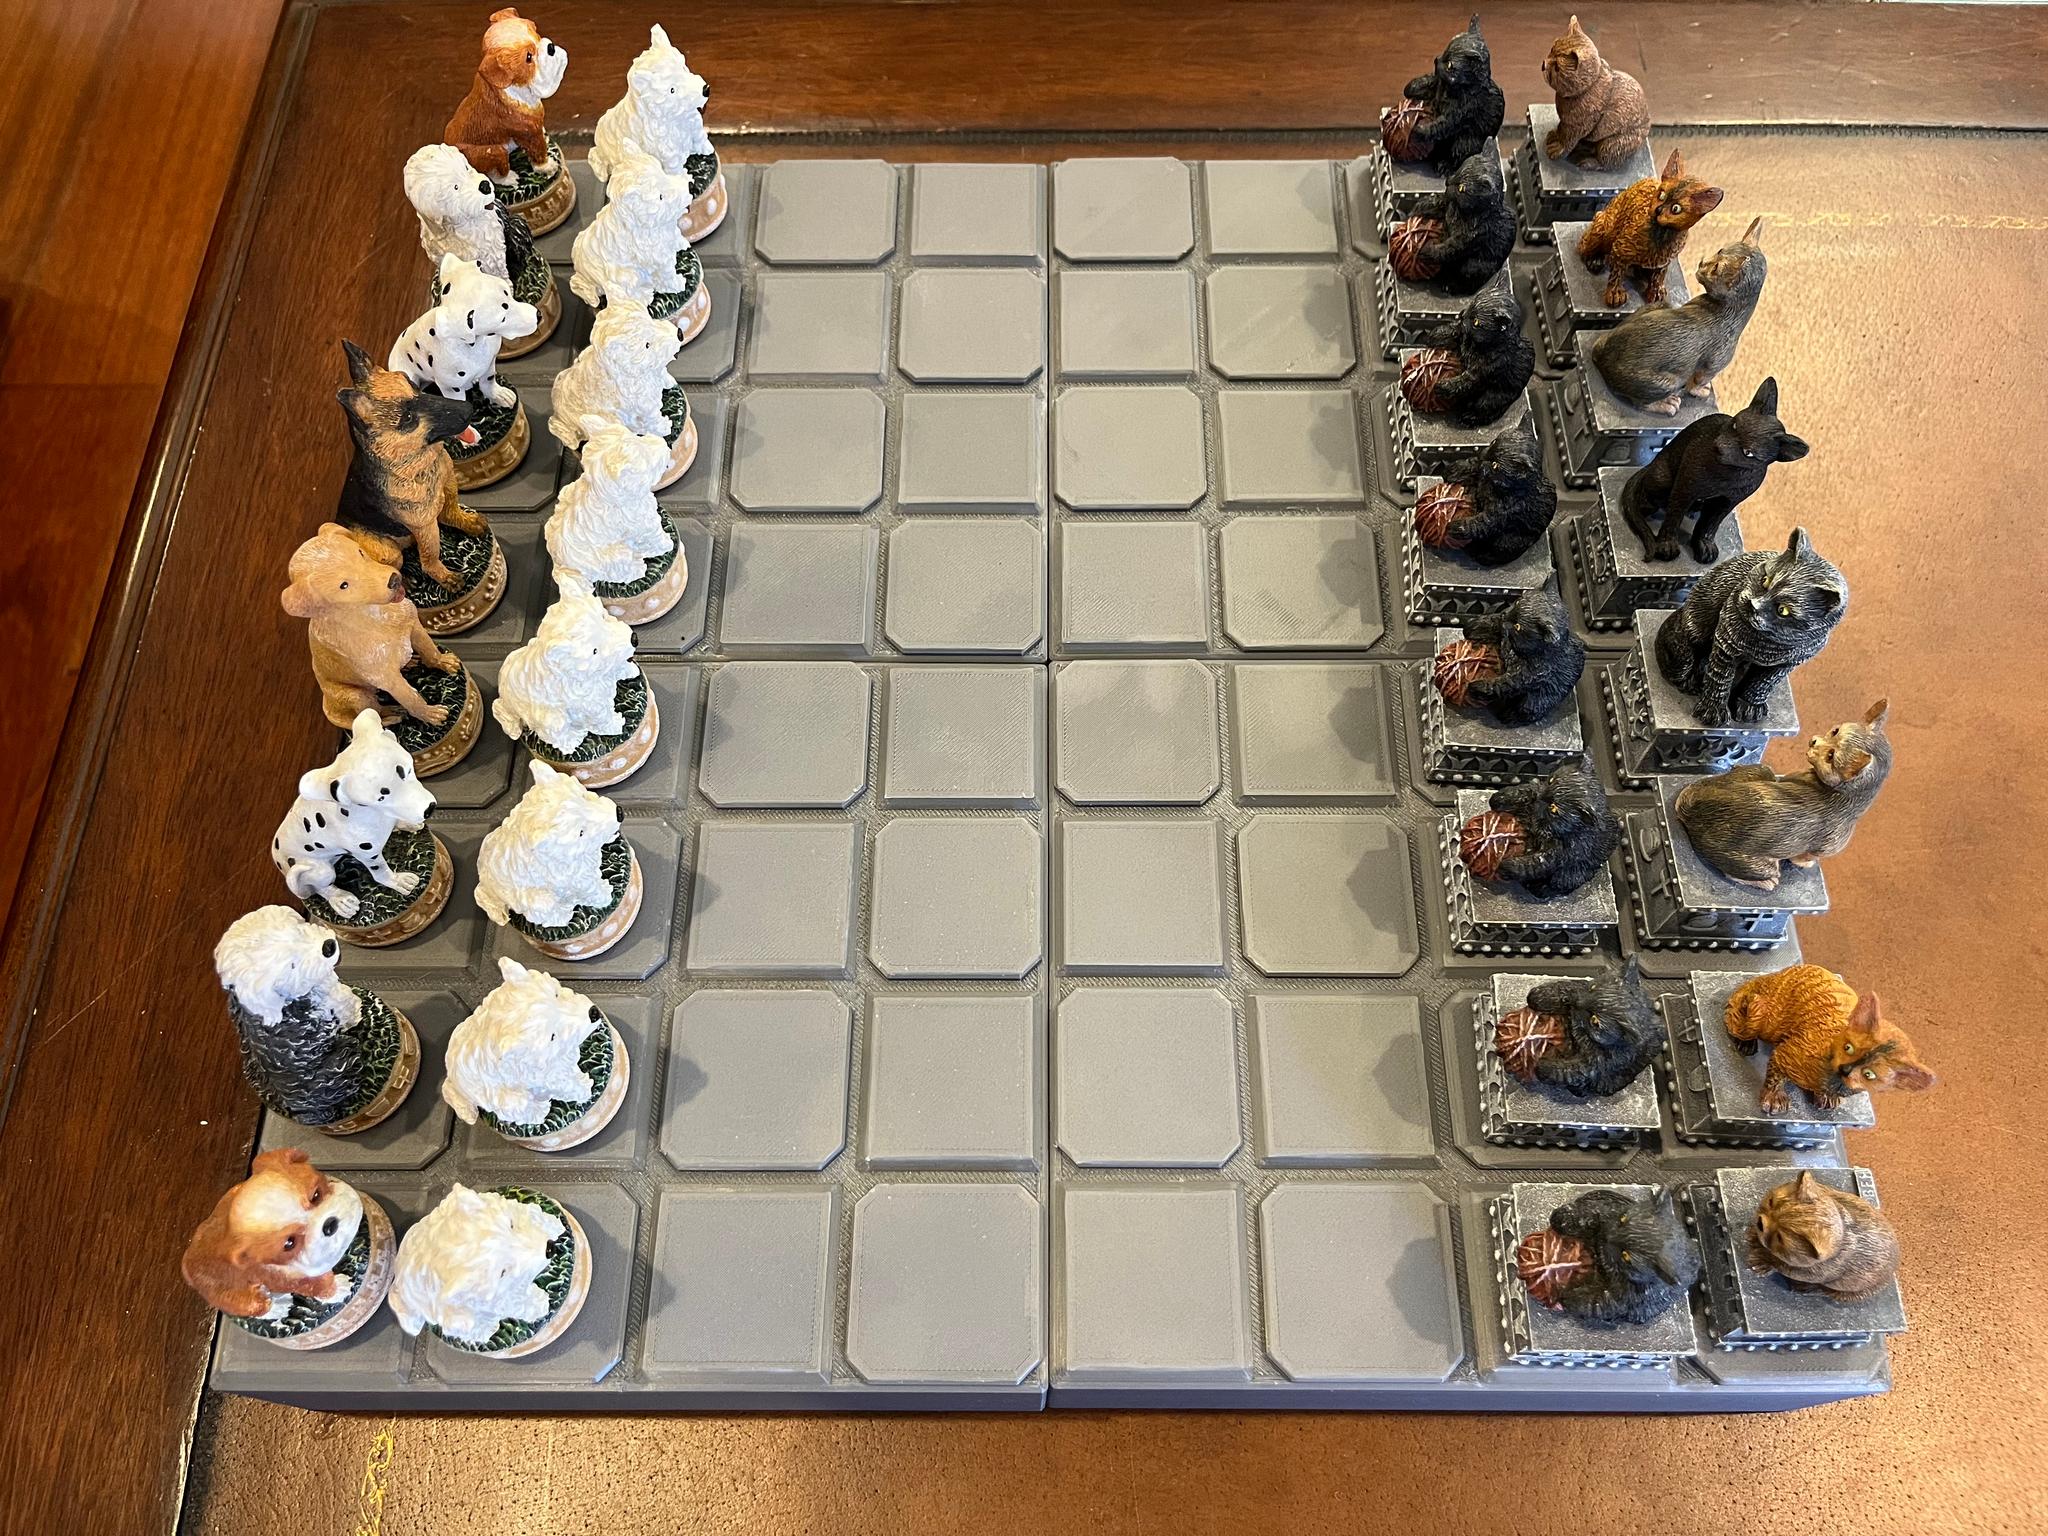 Finished case prints assembled into a chessboard.